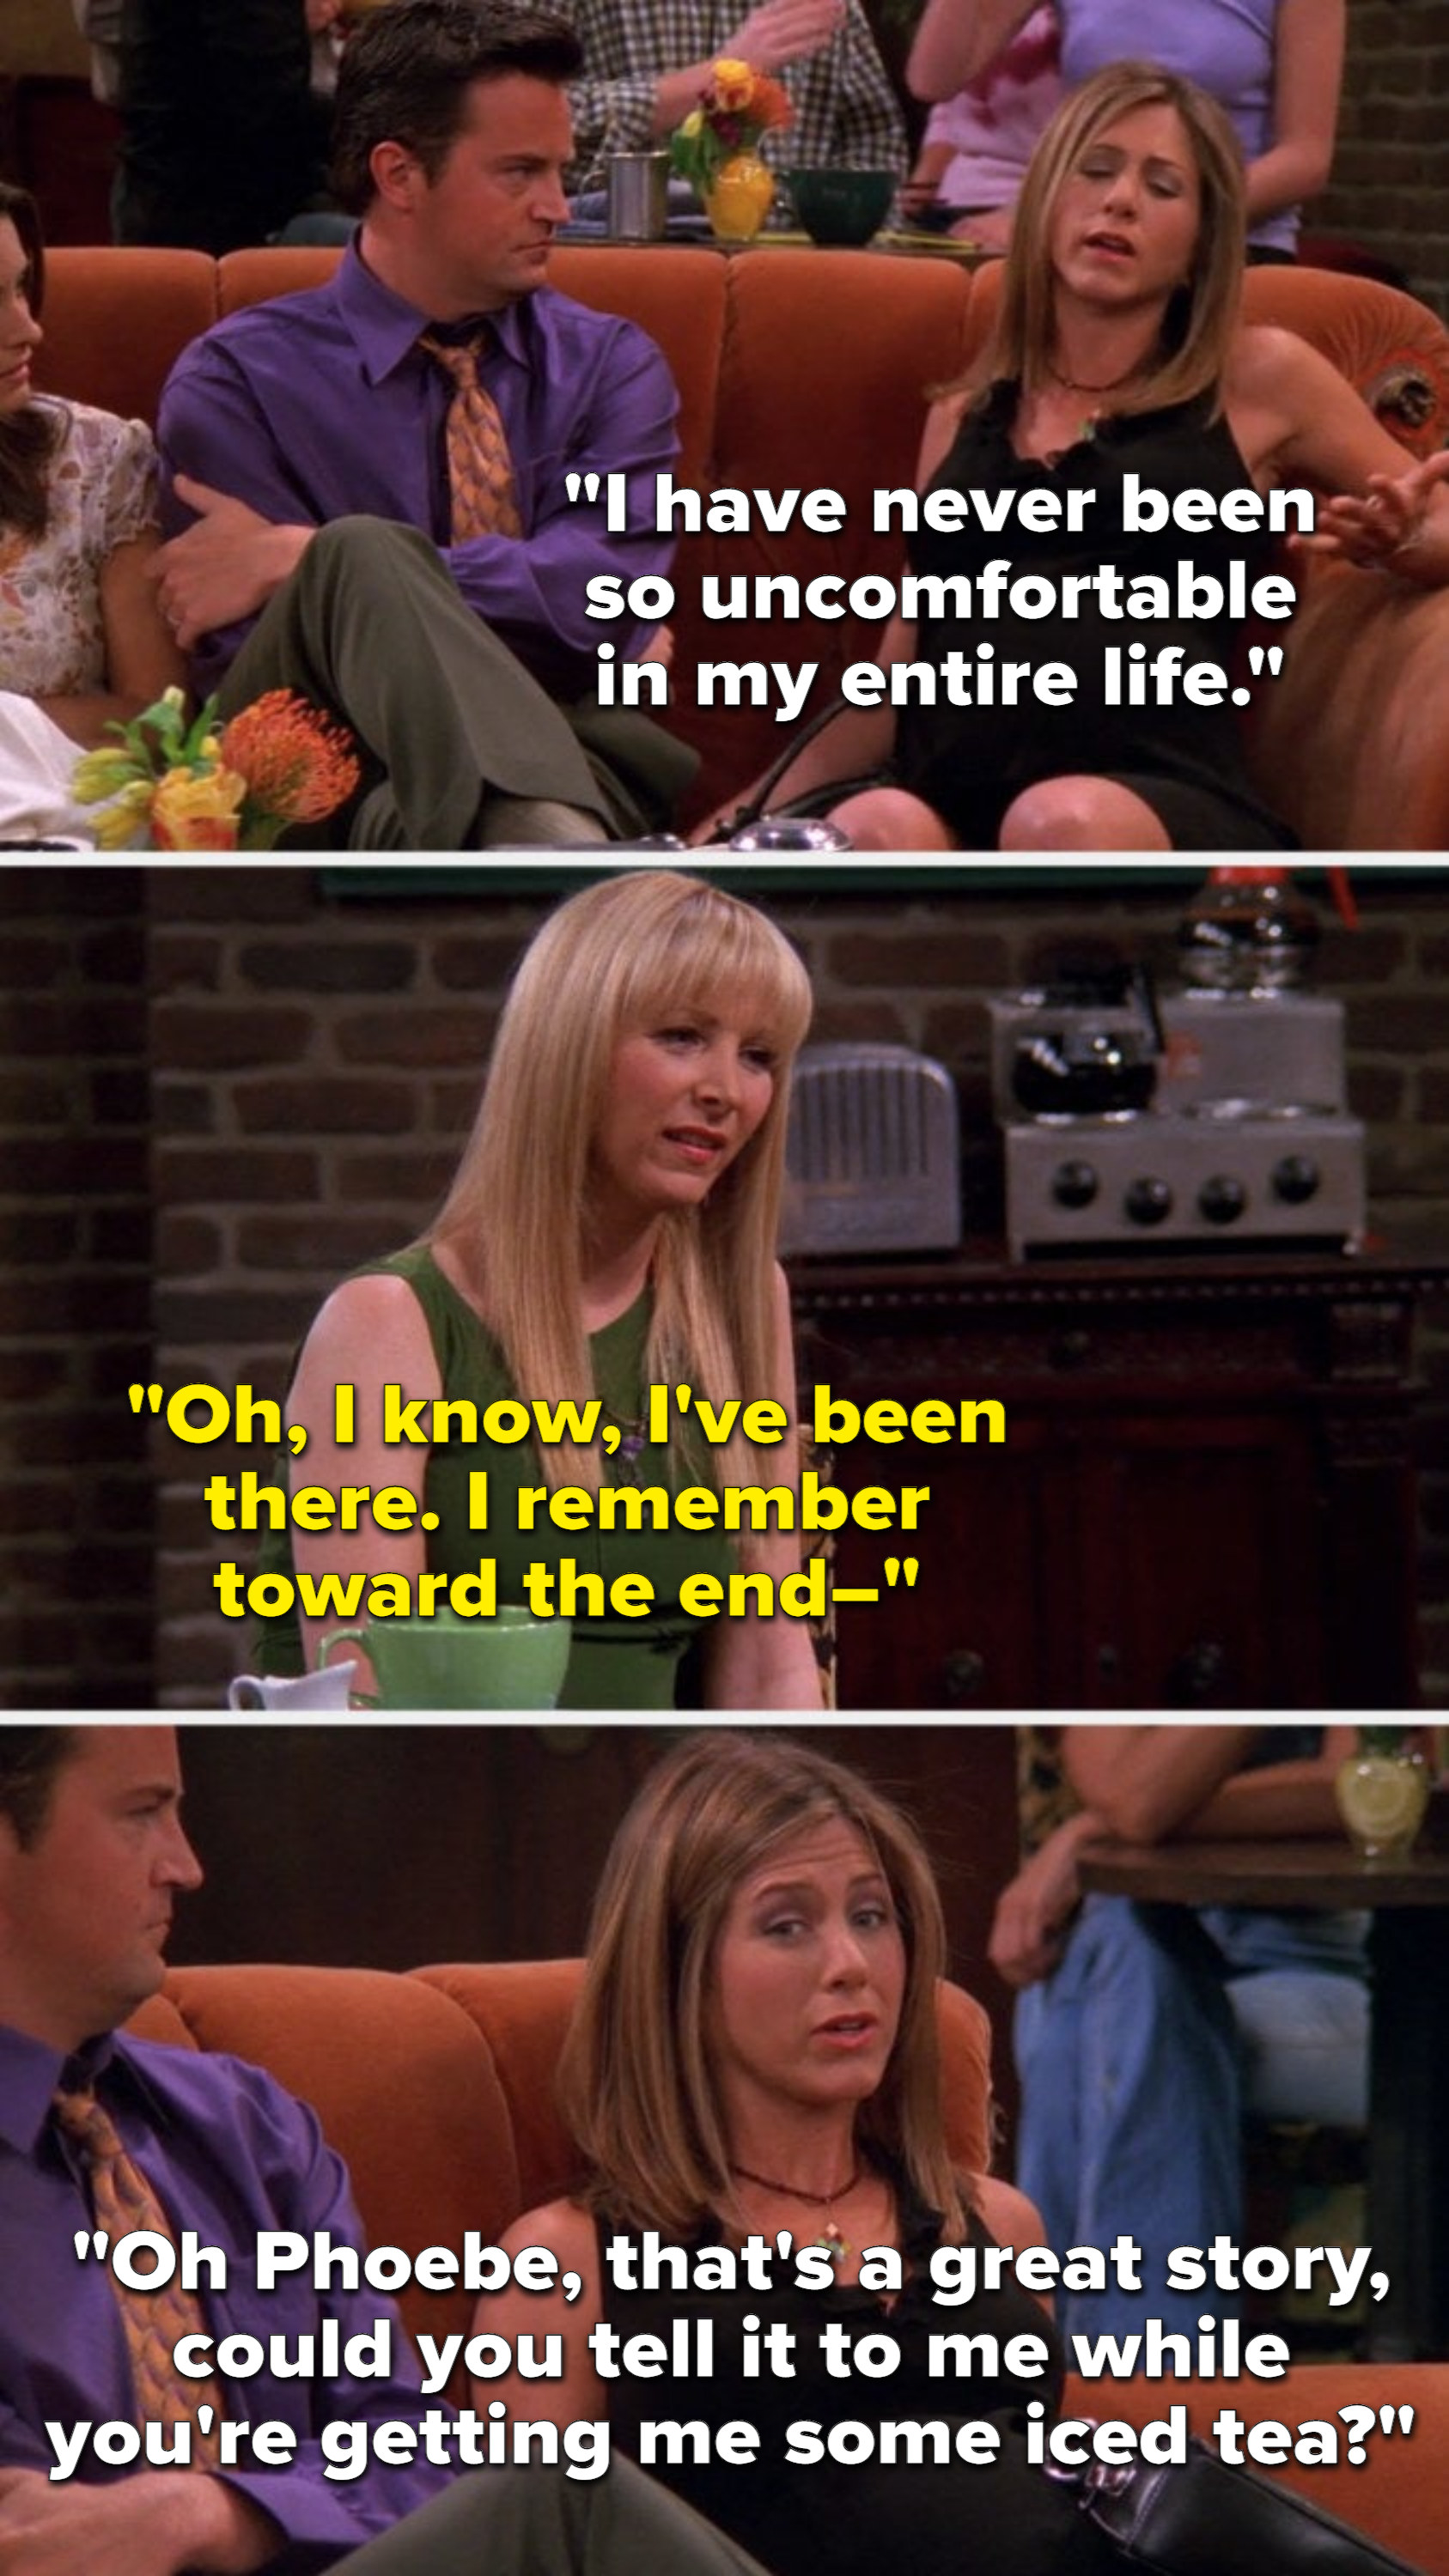 Rachel says, I have never been so uncomfortable in my entire life, Phoebe says, I know, Ive been there, I remember toward the end, and Rachel cuts her off to say, Phoebe, thats a great story, could you tell it to me while you are getting me some iced tea